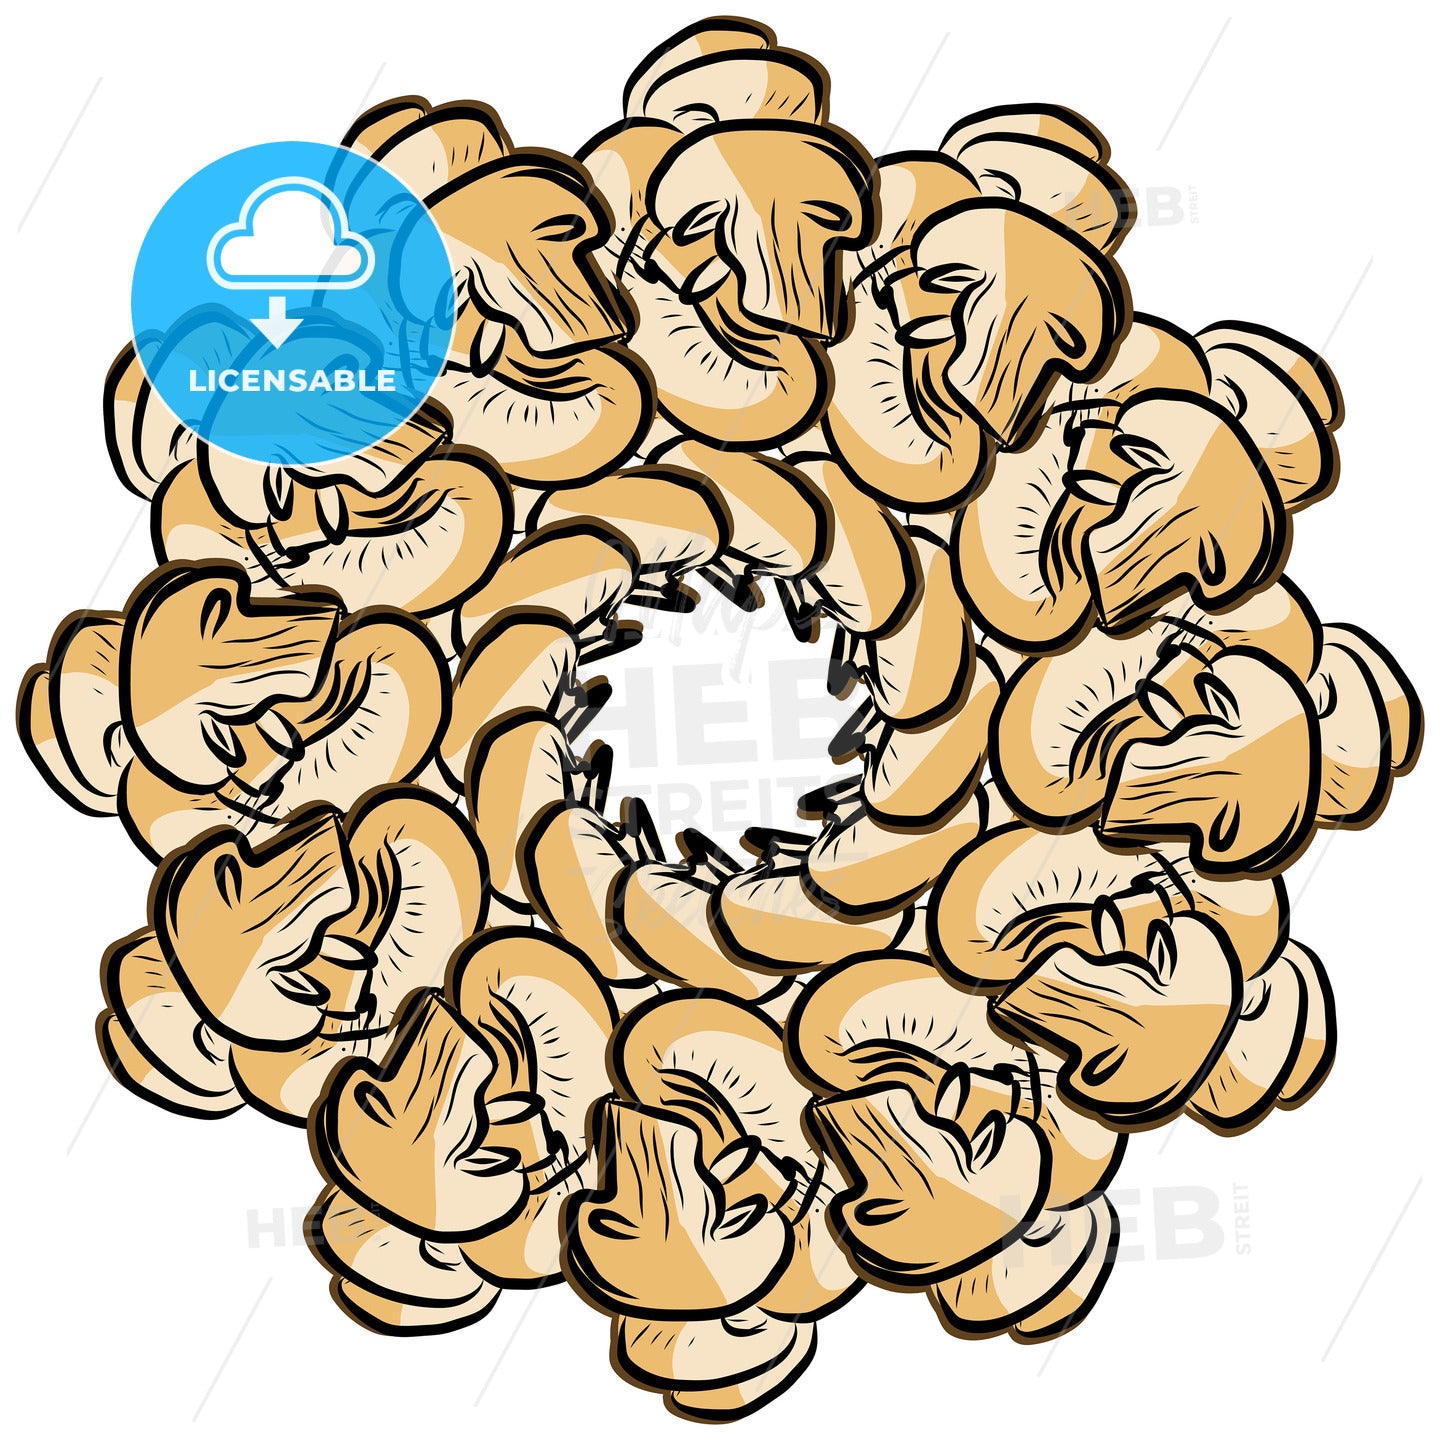 Many Mushrooms arranged in a circle on white – instant download